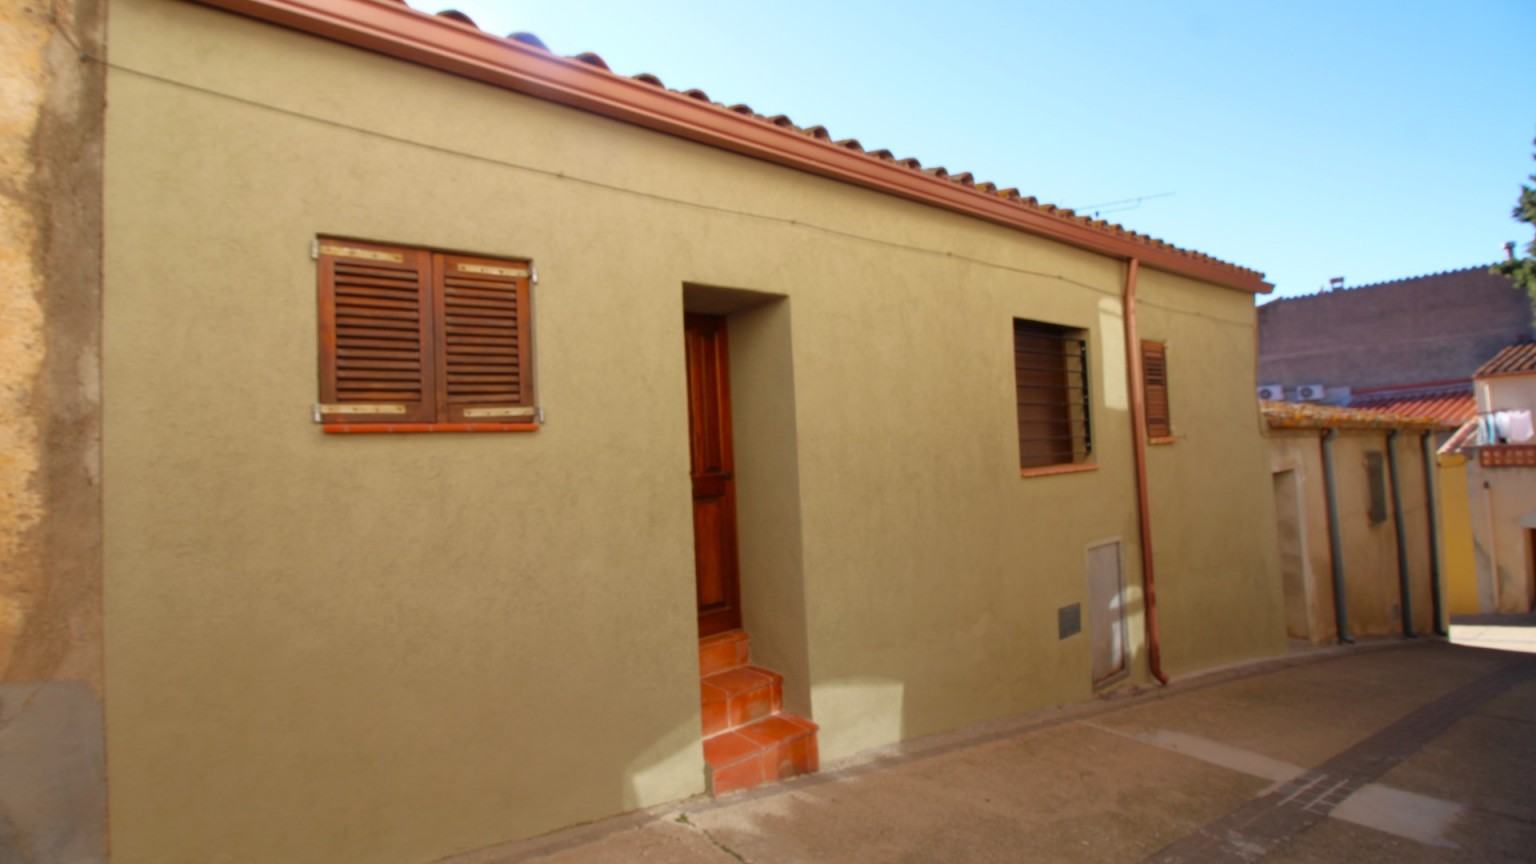 House for rent in Vilamaniscle